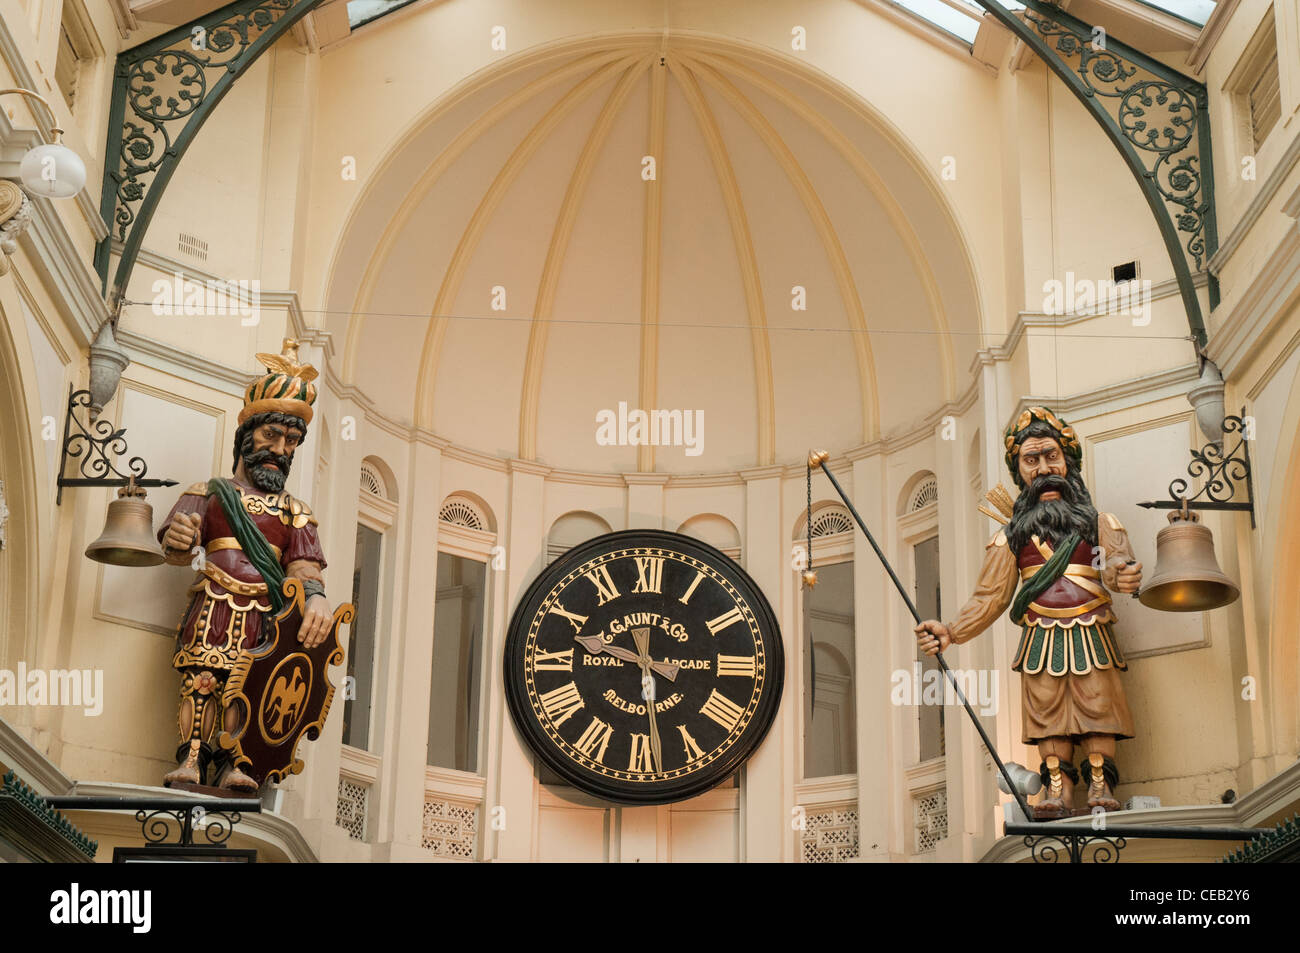 Gog and Magog figures keep time either side of Gaunt's Clock in the Renaissance Revival-style Royal Arcade , Melbourne Stock Photo